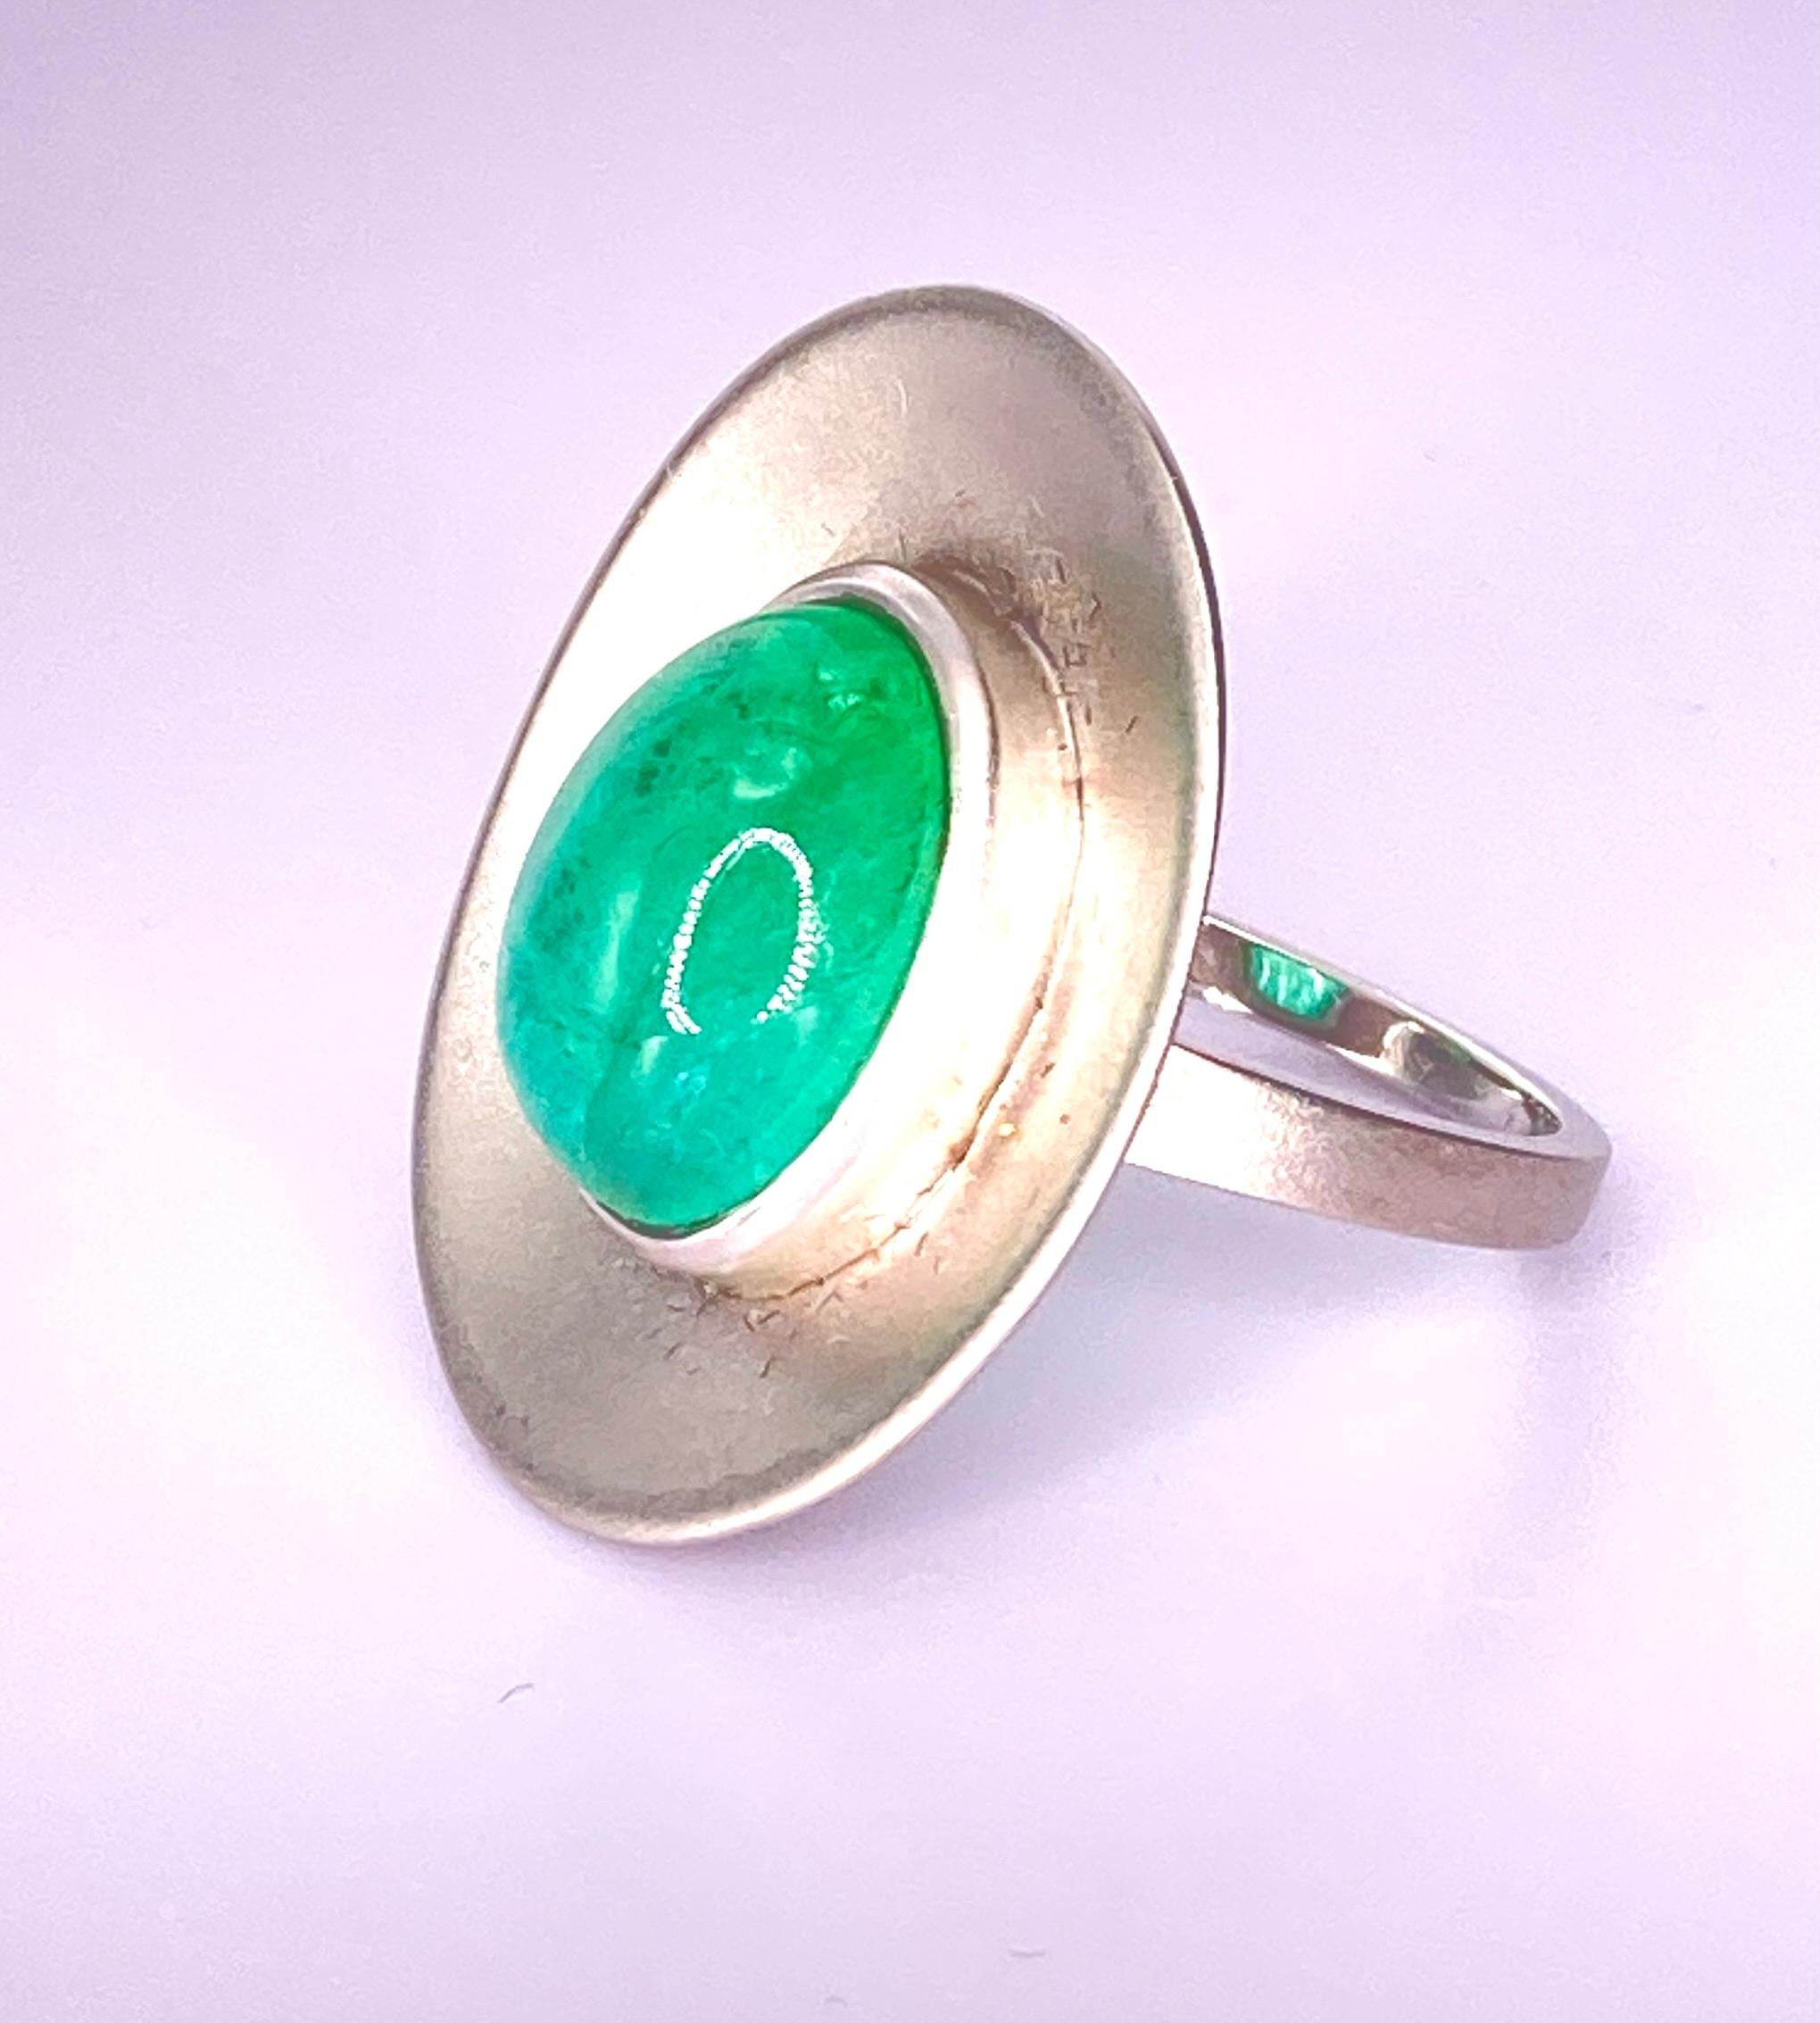 8 Carat Paraiba Tourmaline Cabochon 18Kt White Gold Ring In New Condition For Sale In Los Angeles, CA